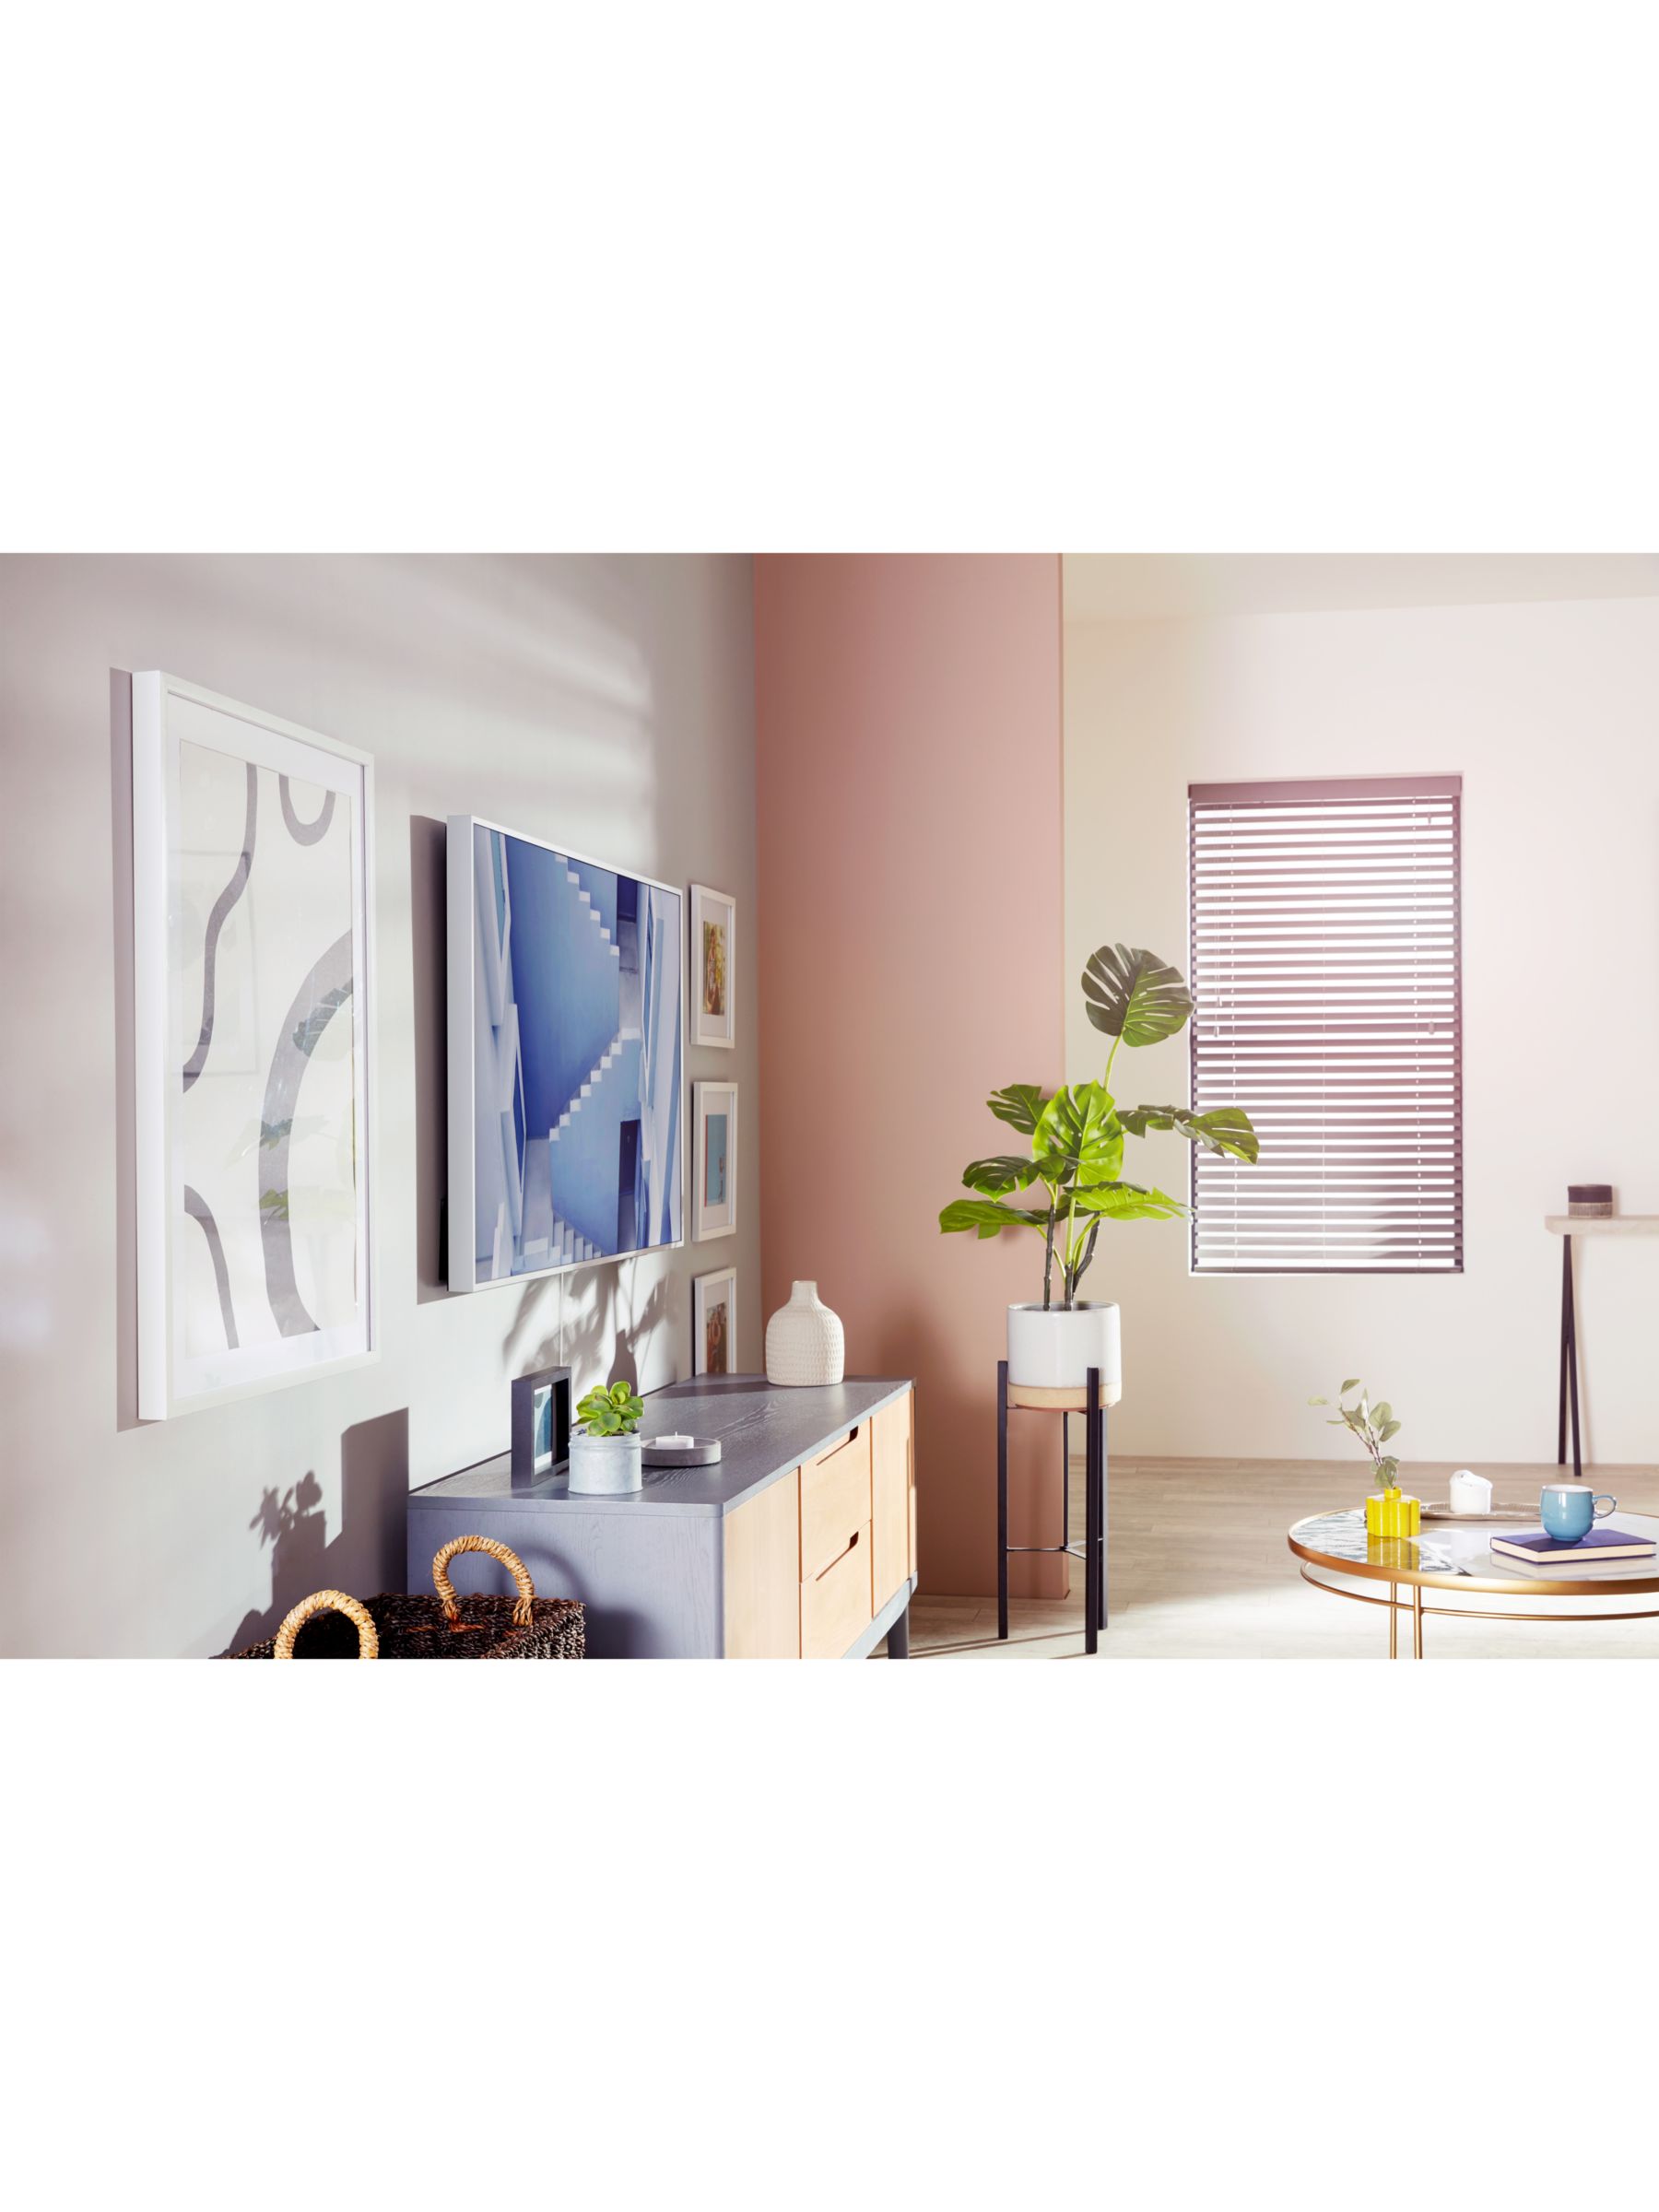 Samsung The Frame (2020) QLED Art Mode TV with No-Gap Wall Mount, 50 inch at John Lewis & Partners